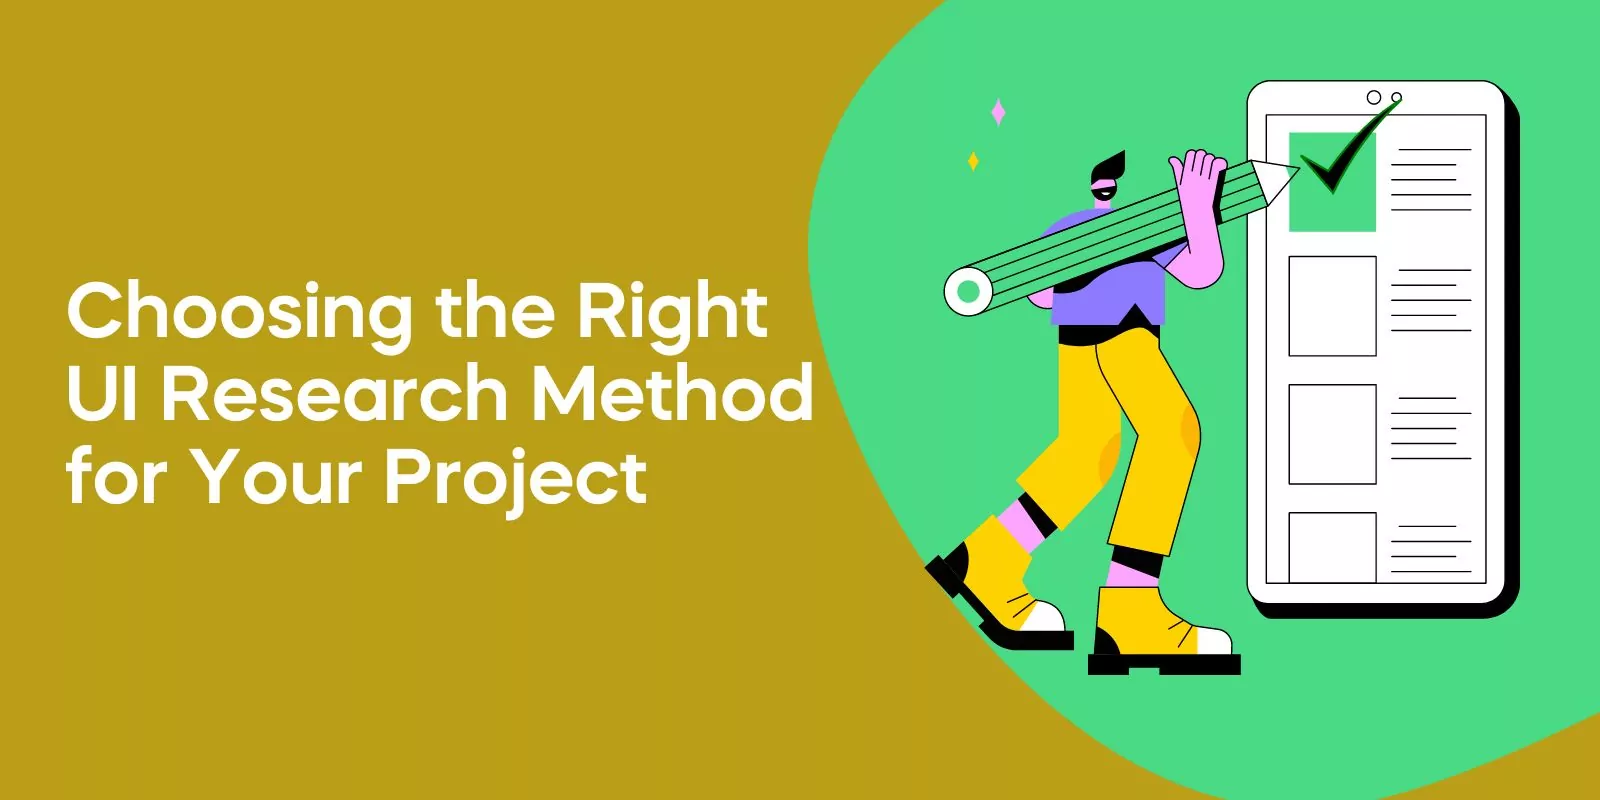 Choosing the Right UI Research Method for Your Project